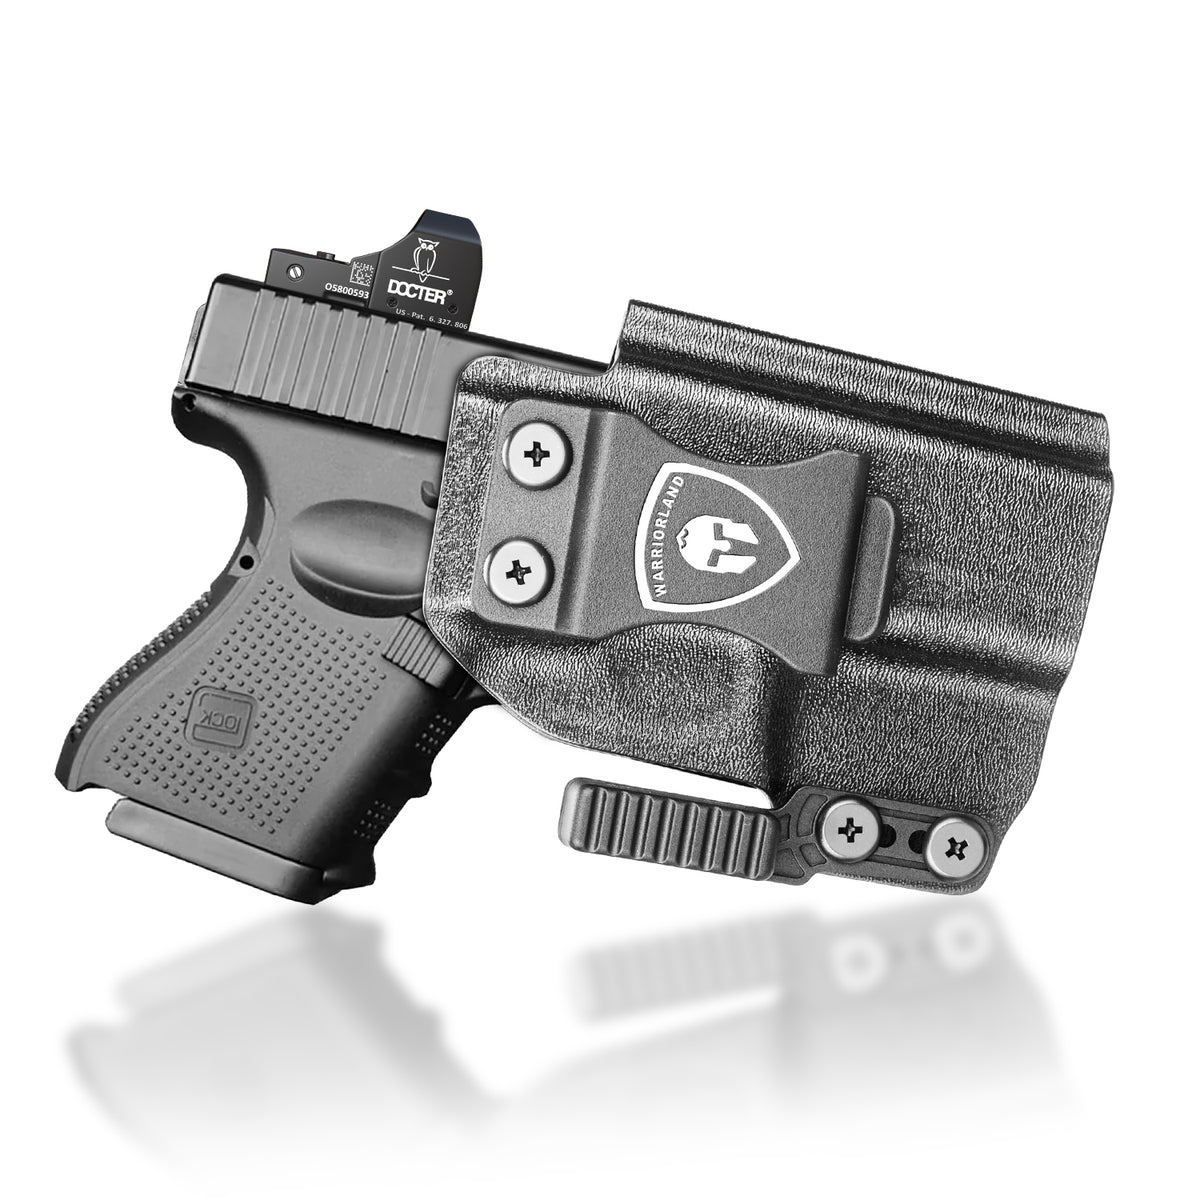 IWB Kydex Holster with Claw Attachment and Optic Cut Fit G26 Gen 1-5 / G27 & G33 Gen 3-4 Pistol, Inside Waistband Appendix Carry G26 Holster, Adj. Cant & Retention, Right Hand|WARRIORLAND